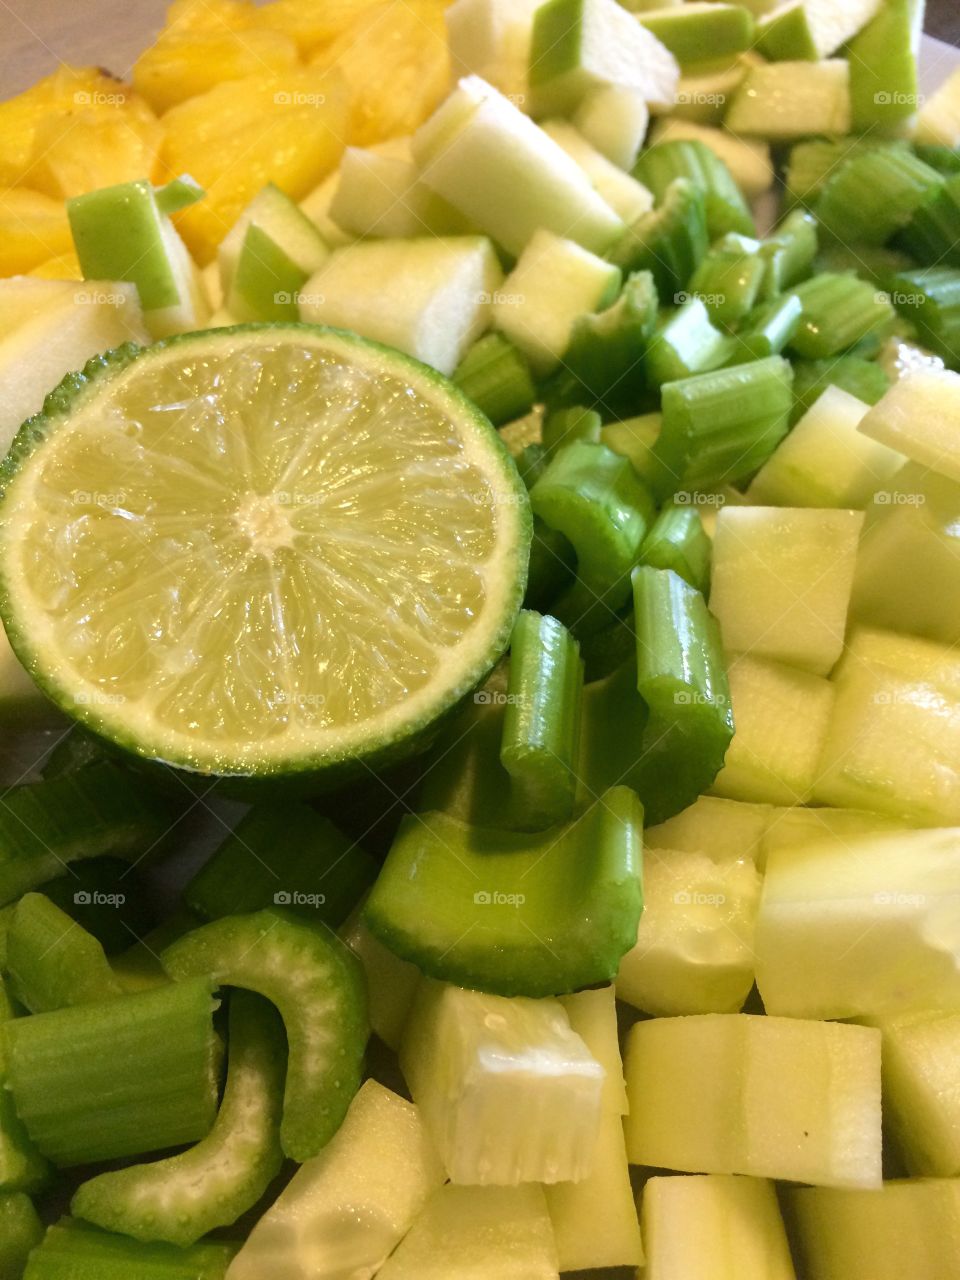 Fresh fruit and vegetables. Prepping to make a green smoothie with lime, pineapple, celery and cucumber